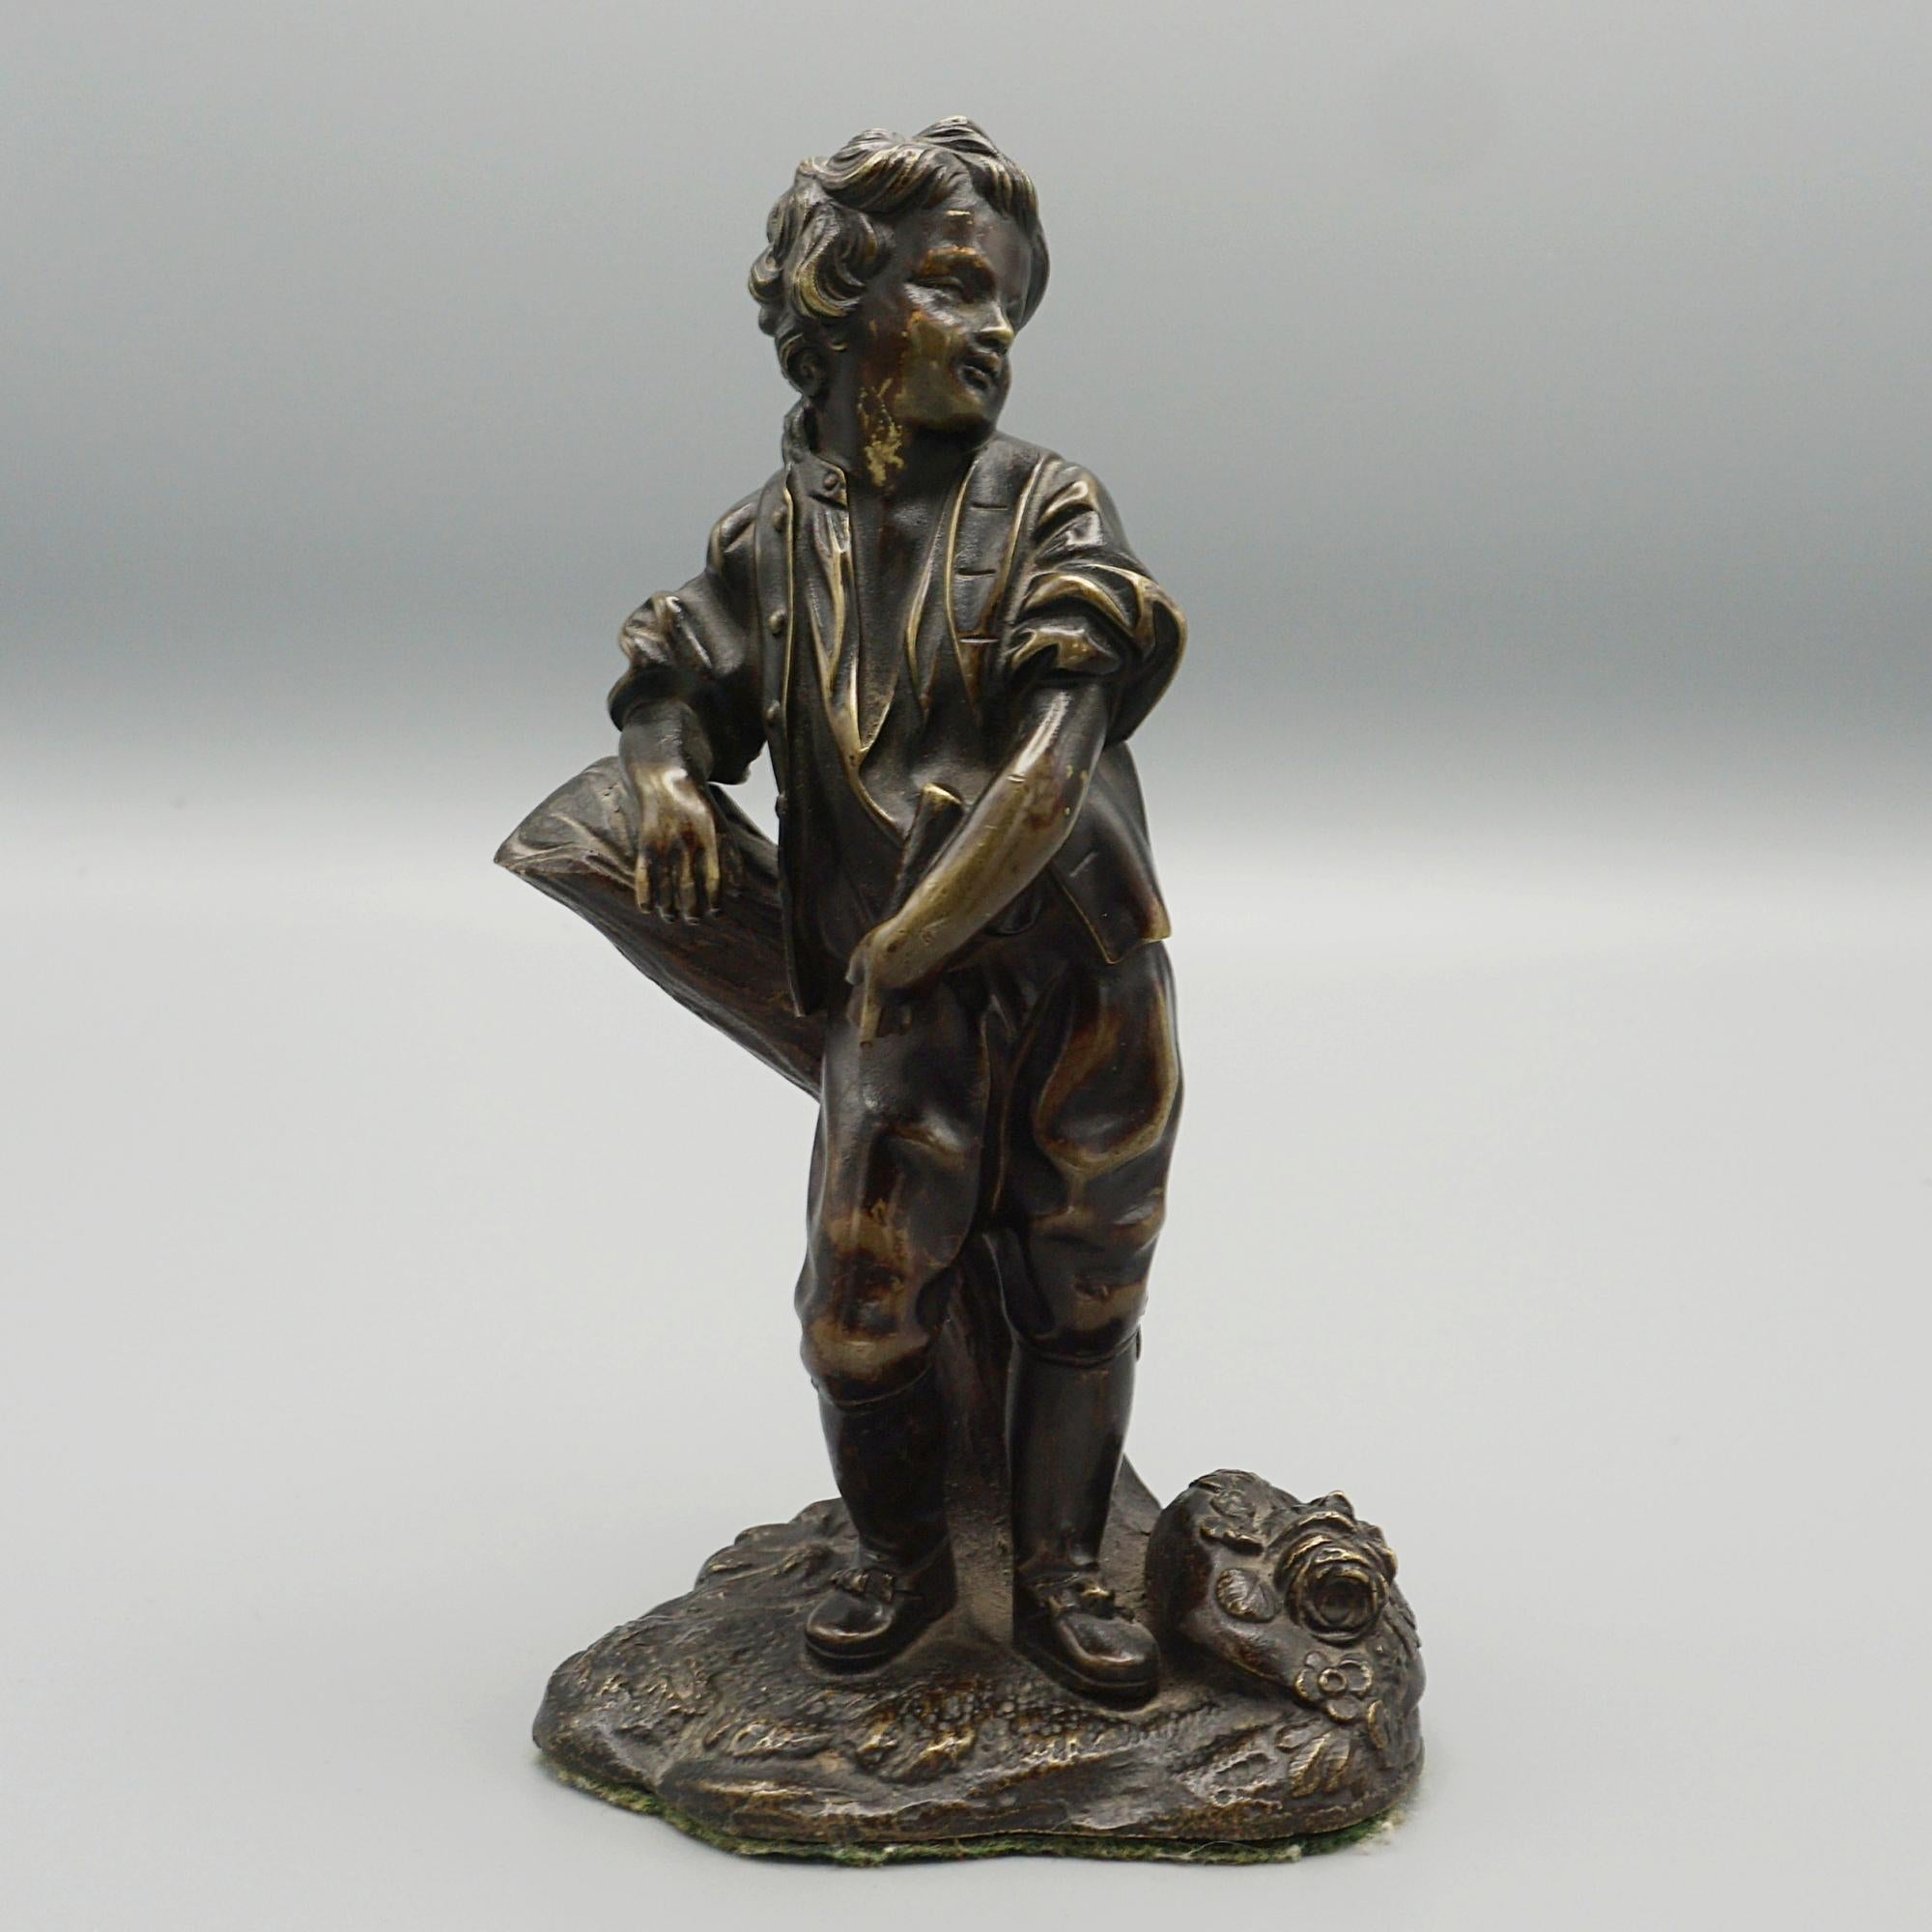 A late 19th century bronze study of a farm boy leaning on a tree stump. Excellent rich brown patination. Unsigned. 

Dimensions: H 17.5cm  W 10cm D 7cm

Origin: French

Date: Circa 1880

Item Number: 1503242